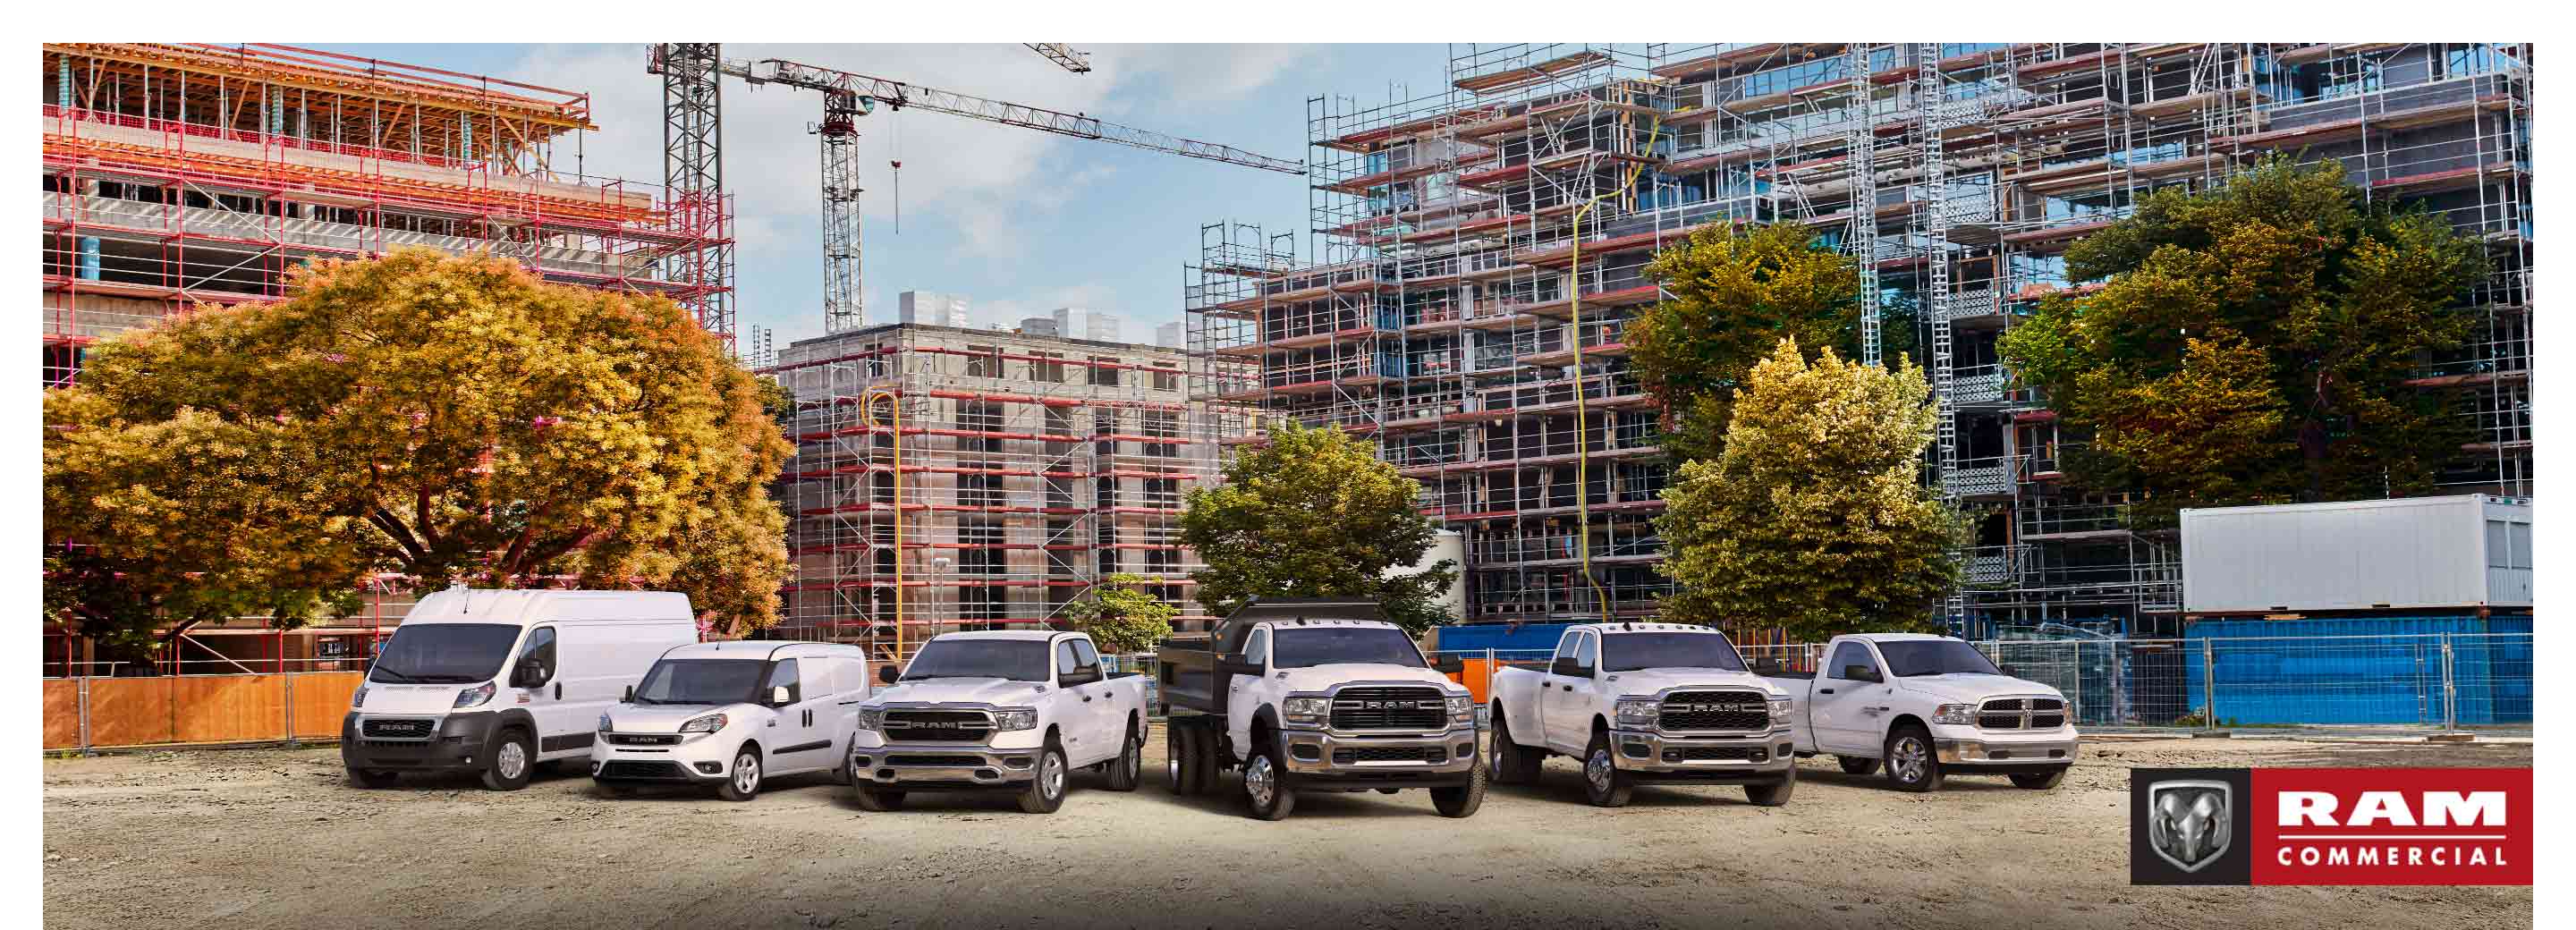 The 2021 Ram lineup parked at a massive commercial construction site. From left to right: a Ram ProMaster High Roof, Ram ProMaster City Cargo Van, Ram 1500, Ram 5500 Chassis Cab with dump body, Ram 3500 and Ram 1500 Classic. The Ram Commercial logo.